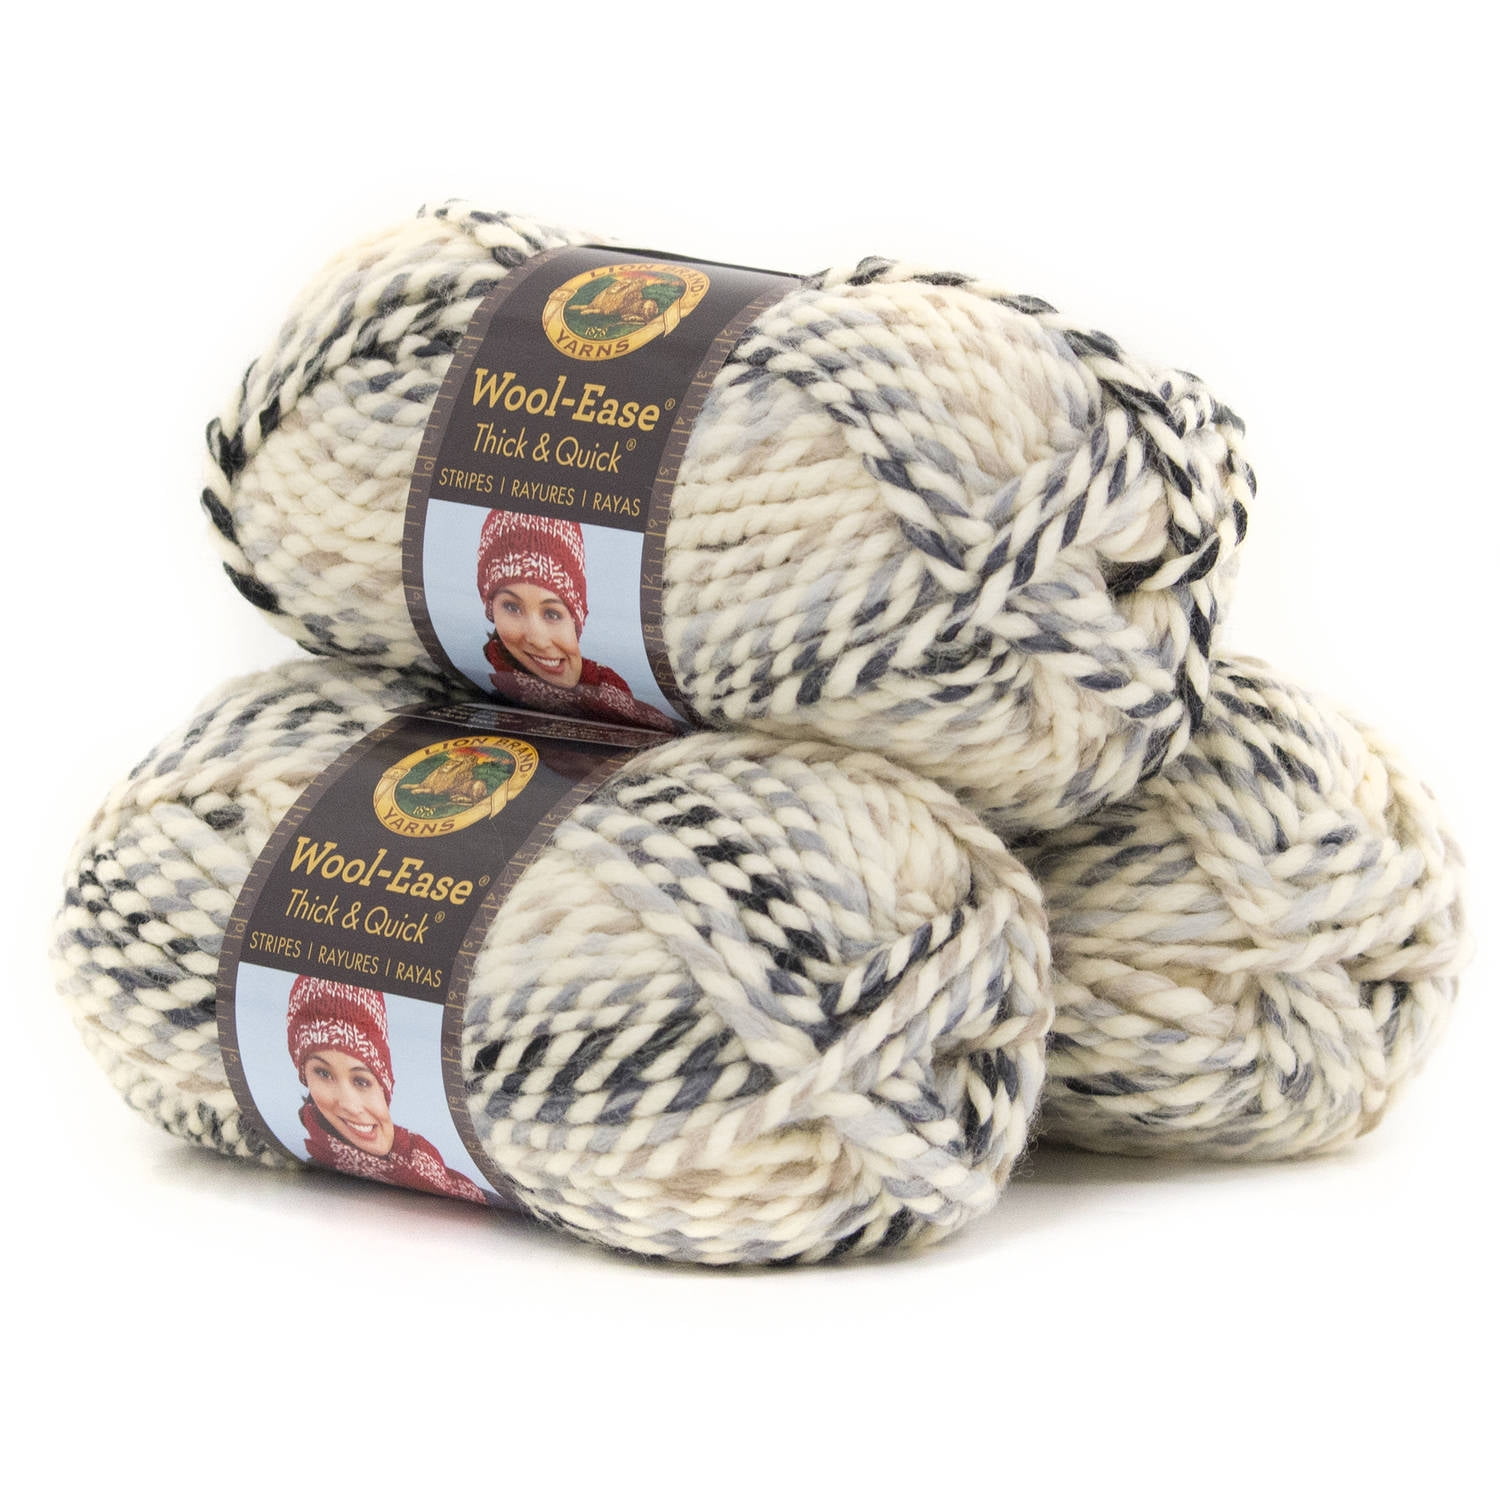 Lion Brand Yarn Wool-Ease Thick and Quick Moonlight Classic Super